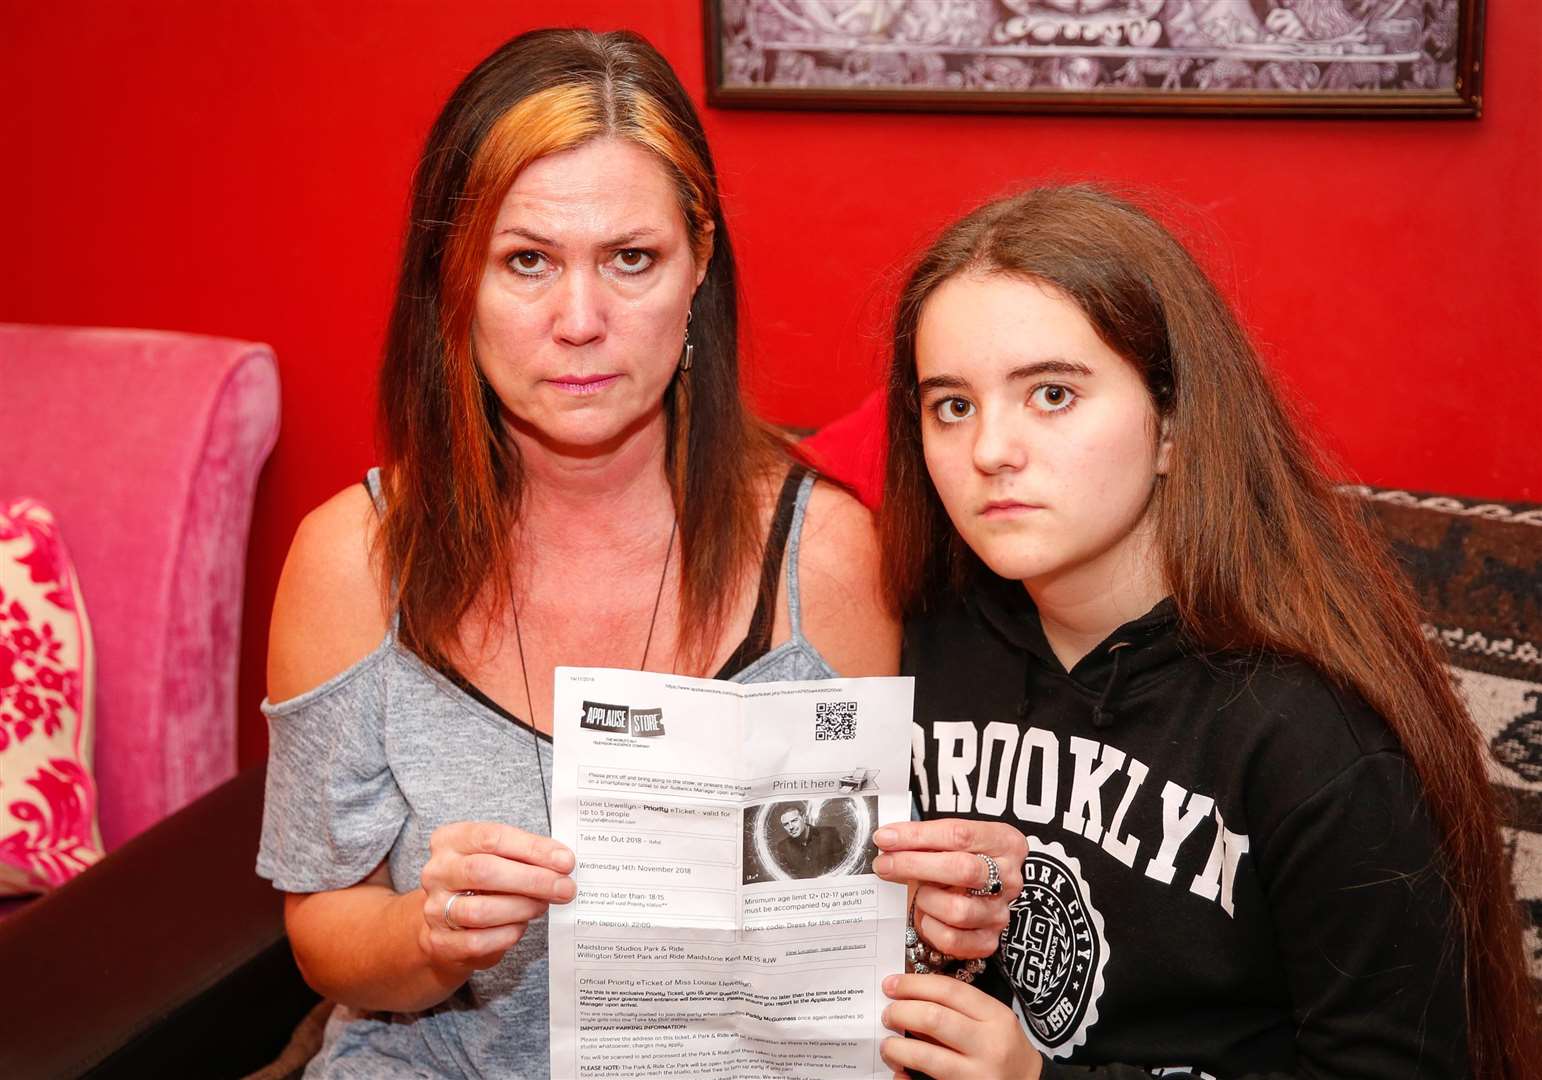 Louise Hartnup with 12-year-old daughter Samara and their e-ticket to watch Take Me Out being filmed at Maidstone Studios